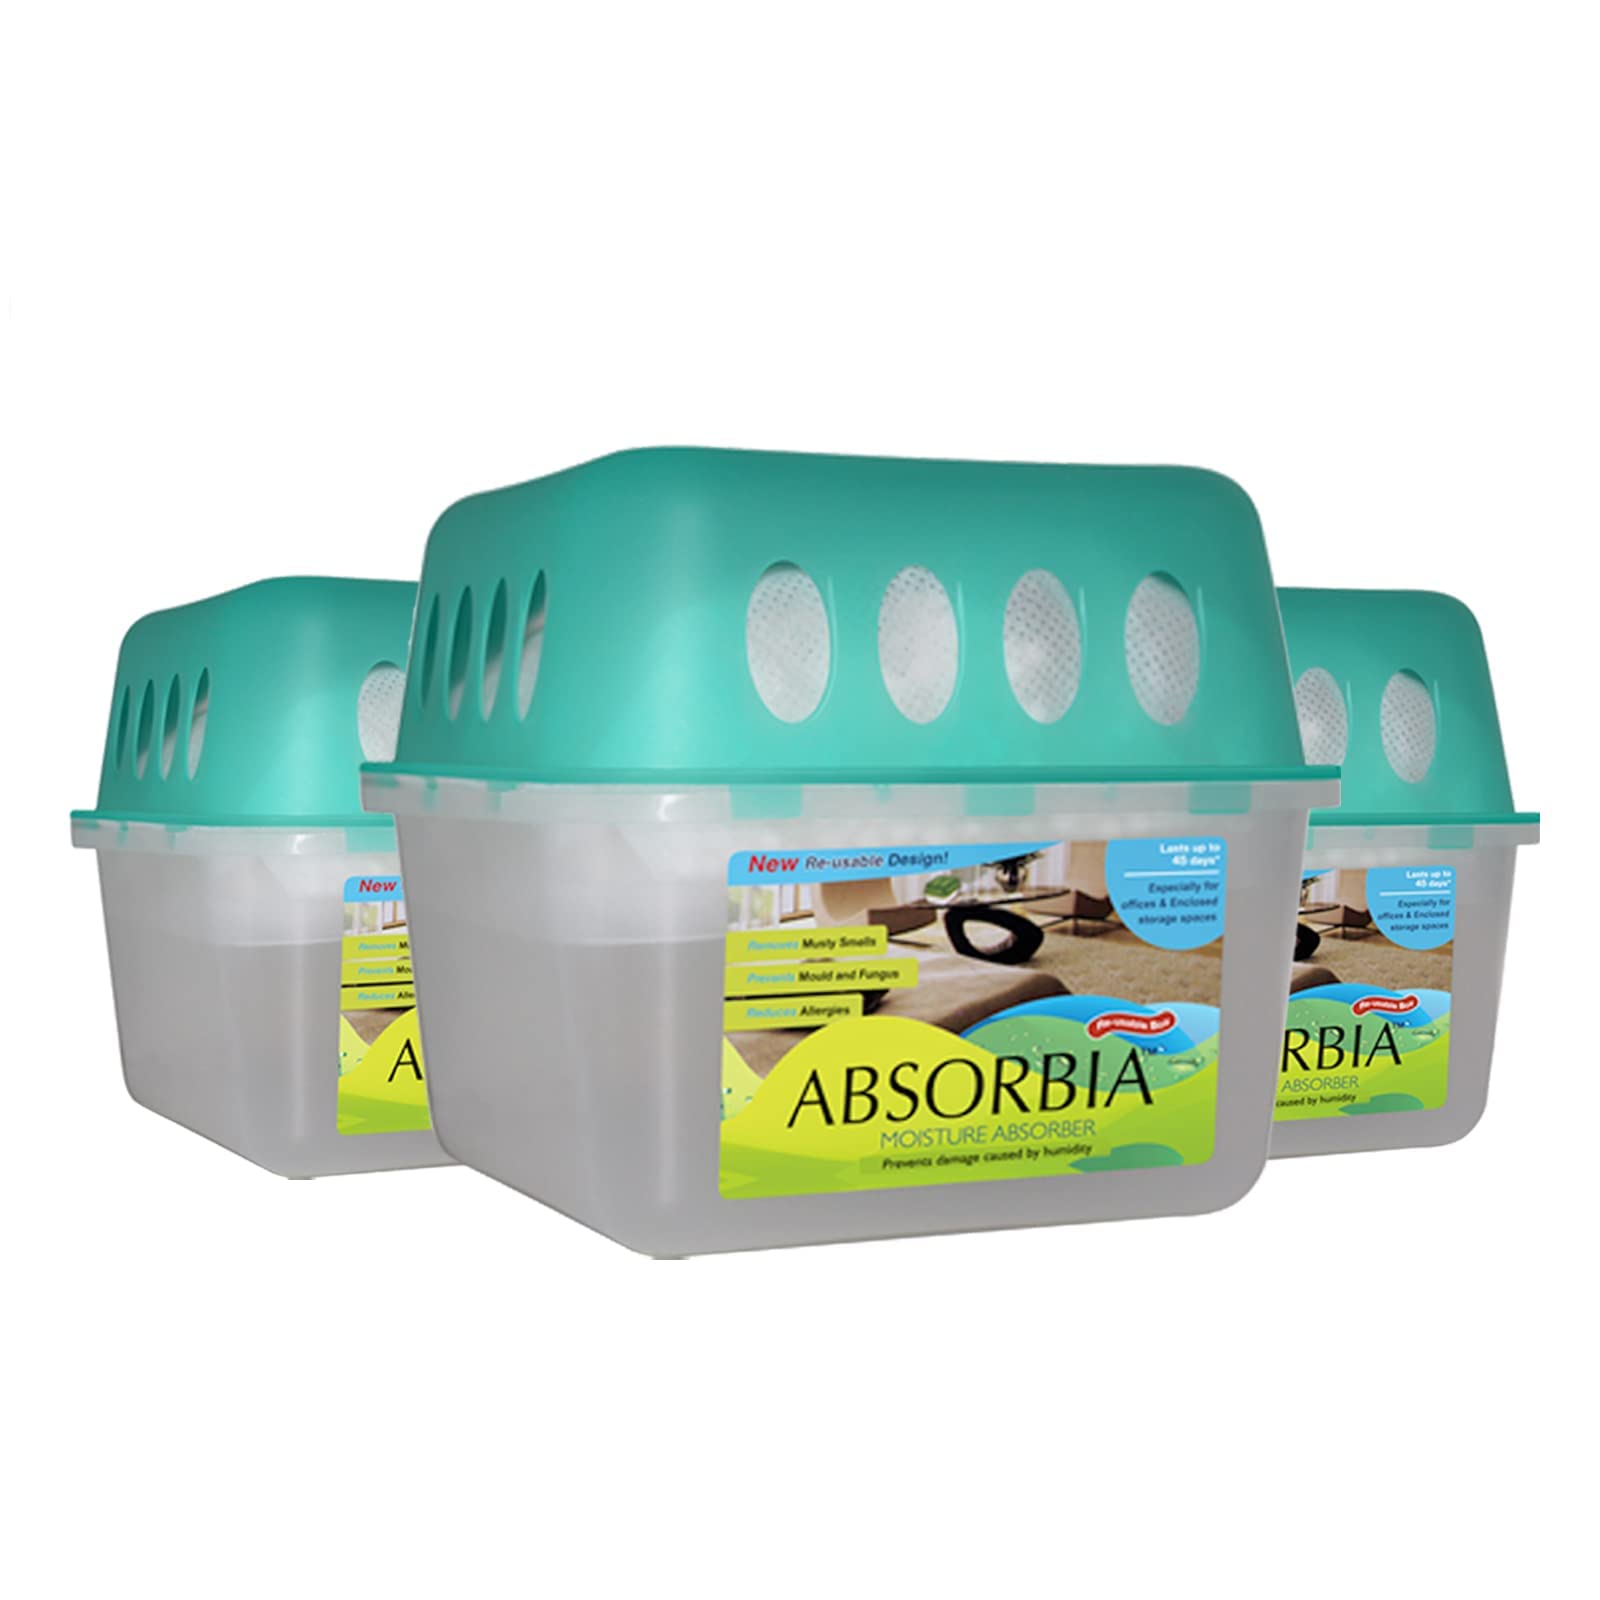 Absorbia Moisture Absorber | Absorbia Reusable Box w/Refill - Pack of 3 X 5 (800ml) |Dehumidifier for Basement, Storerooms, Spare Rooms & Lofts | Fights Against Moisture, Mould, Fungus & Musty Smells